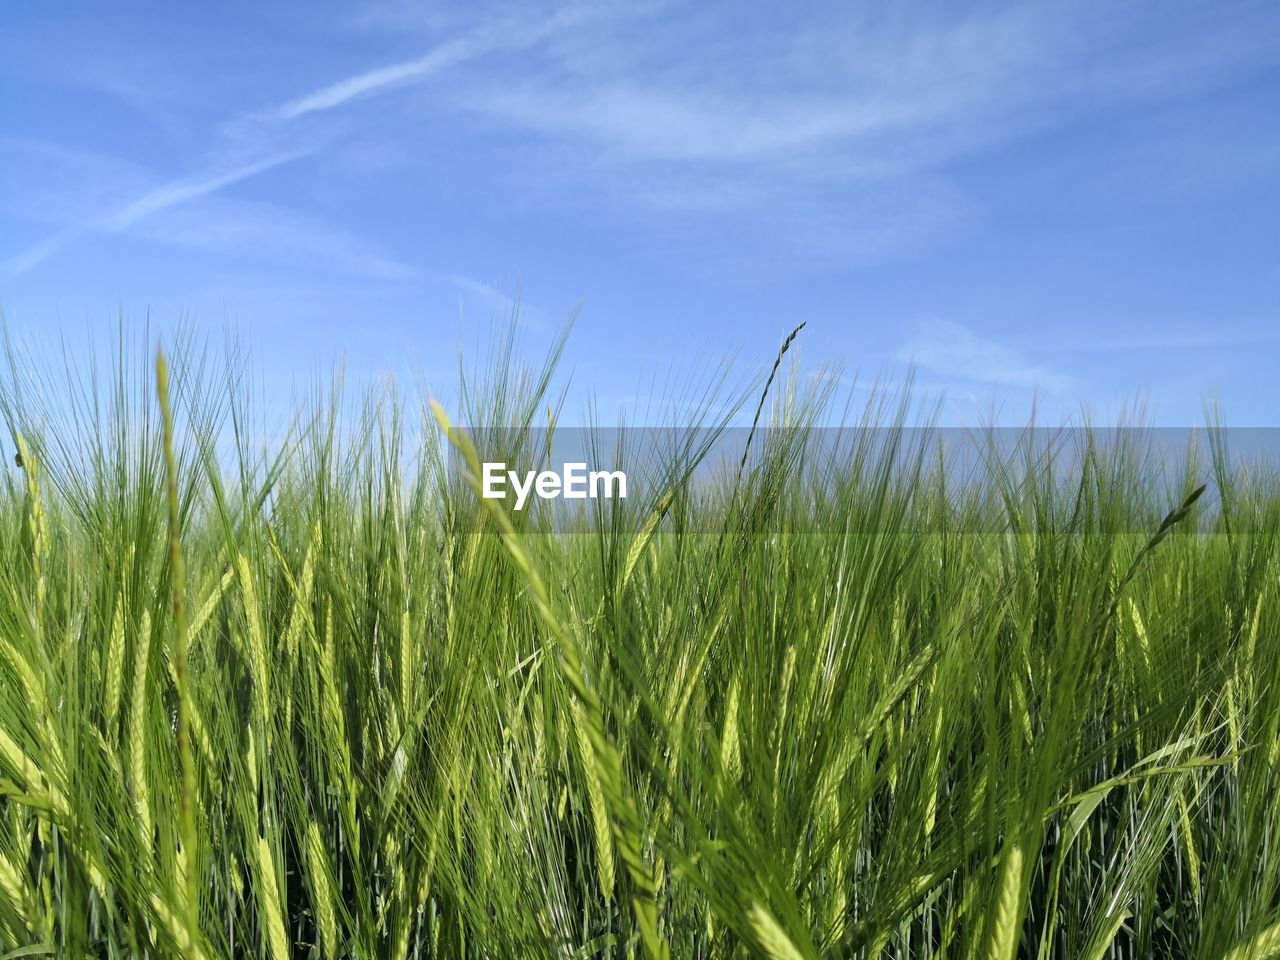 plant, agriculture, sky, growth, landscape, field, crop, rural scene, cereal plant, land, nature, green, grass, grassland, farm, environment, no people, cloud, beauty in nature, barley, blue, day, tranquility, outdoors, food, prairie, scenics - nature, wheat, meadow, triticale, summer, tranquil scene, paddy field, food and drink, corn, rye, sunlight